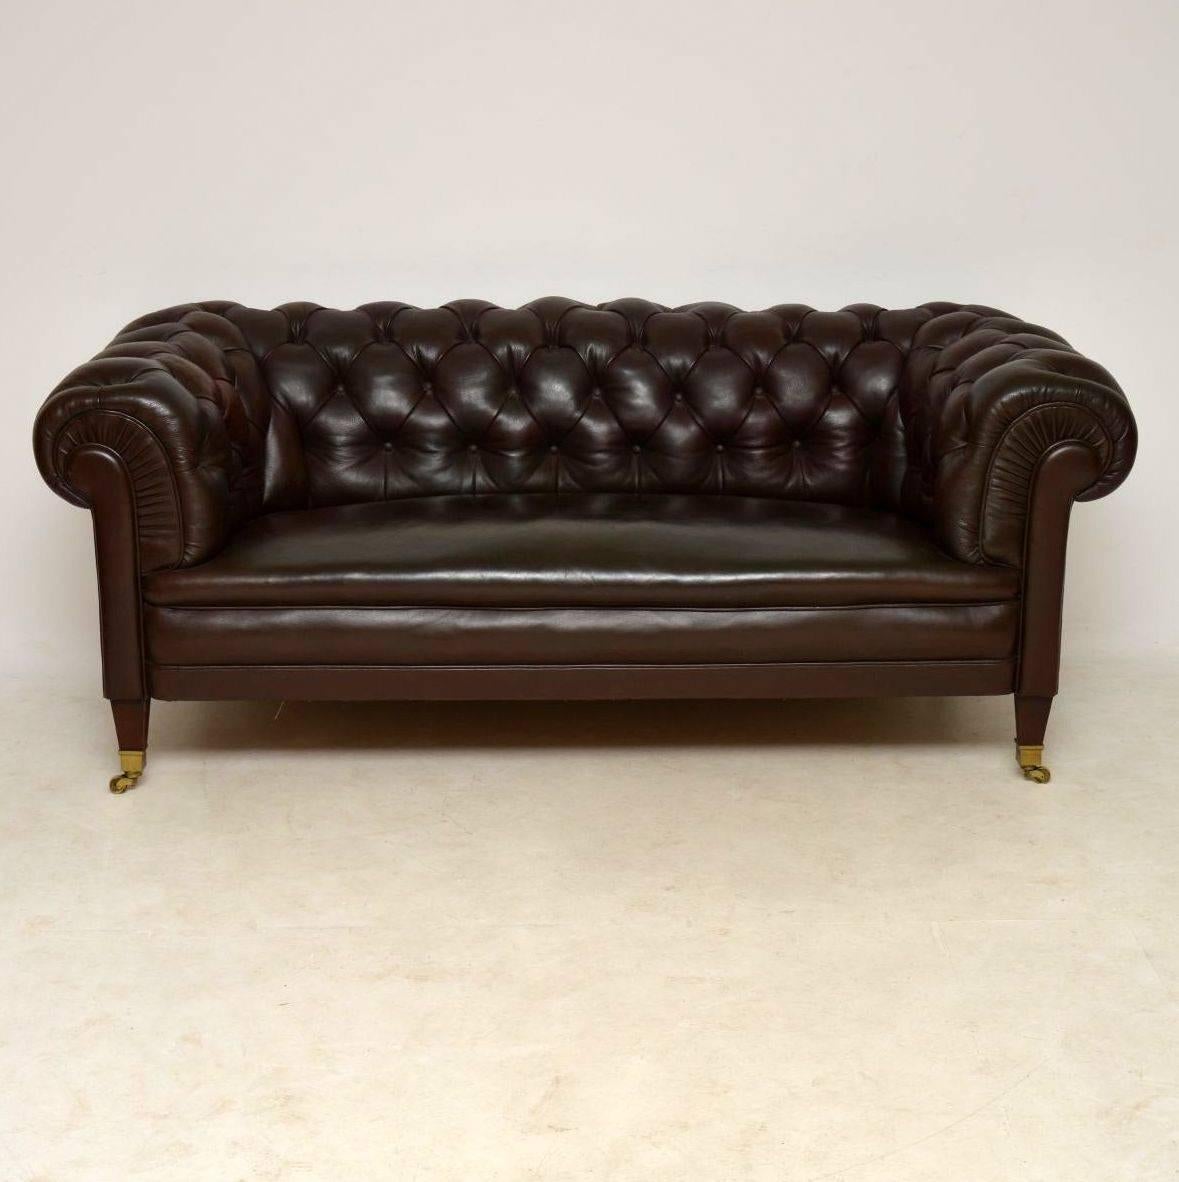 Antique Swedish leather Chesterfield sofa with a deep buttoned back and arms, sitting on mahogany feet with brass capped casters. It’s in good original condition and dates from around the 1910 period. This Chesterfield is of extremely high quality